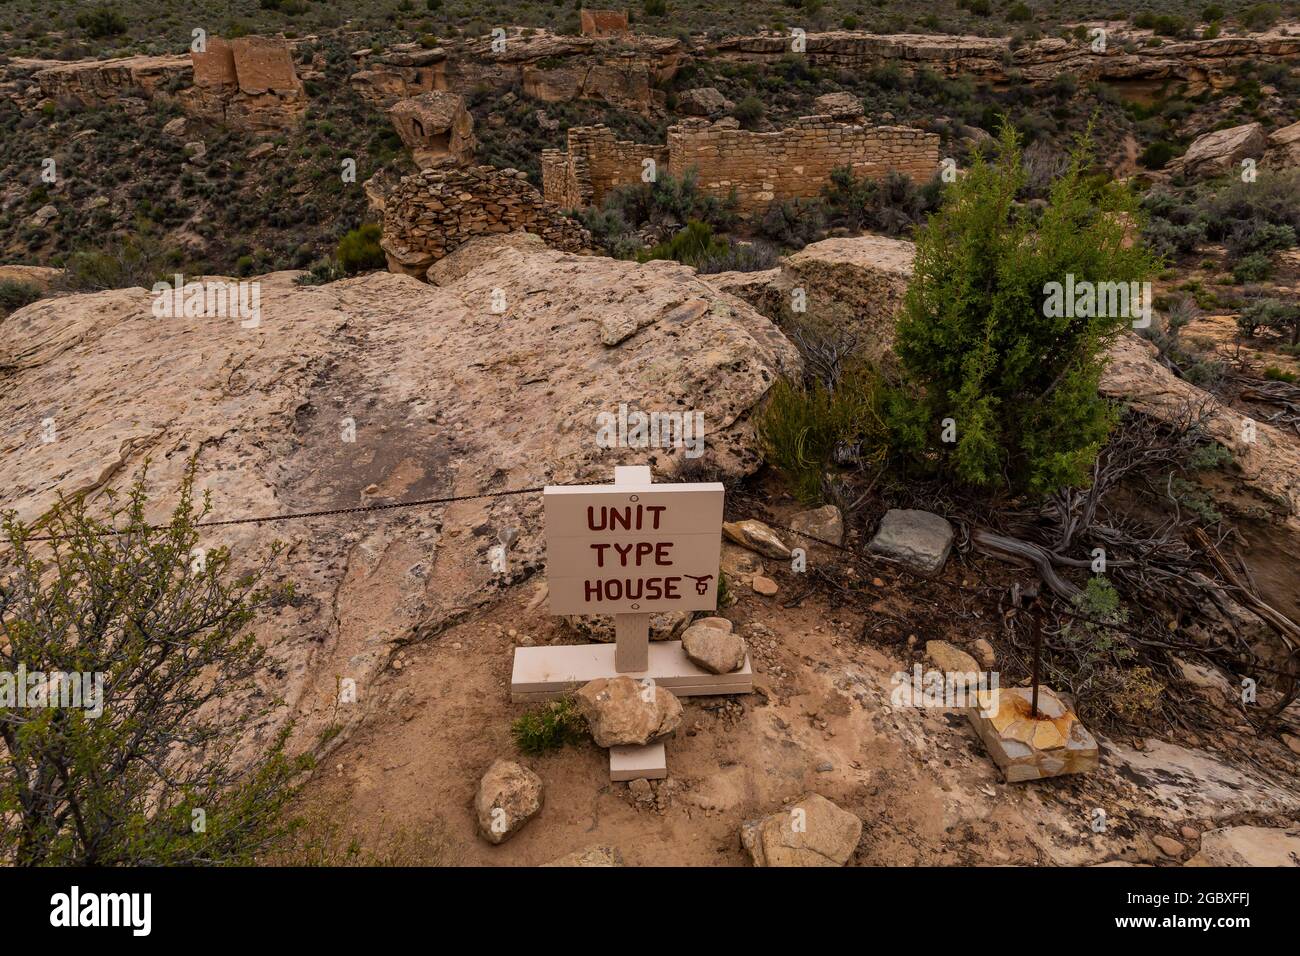 Unit Type House built by Ancient Puebloans along rim of Little Ruin Canyon of Hovenweep National Monument, Utah, USA Stock Photo